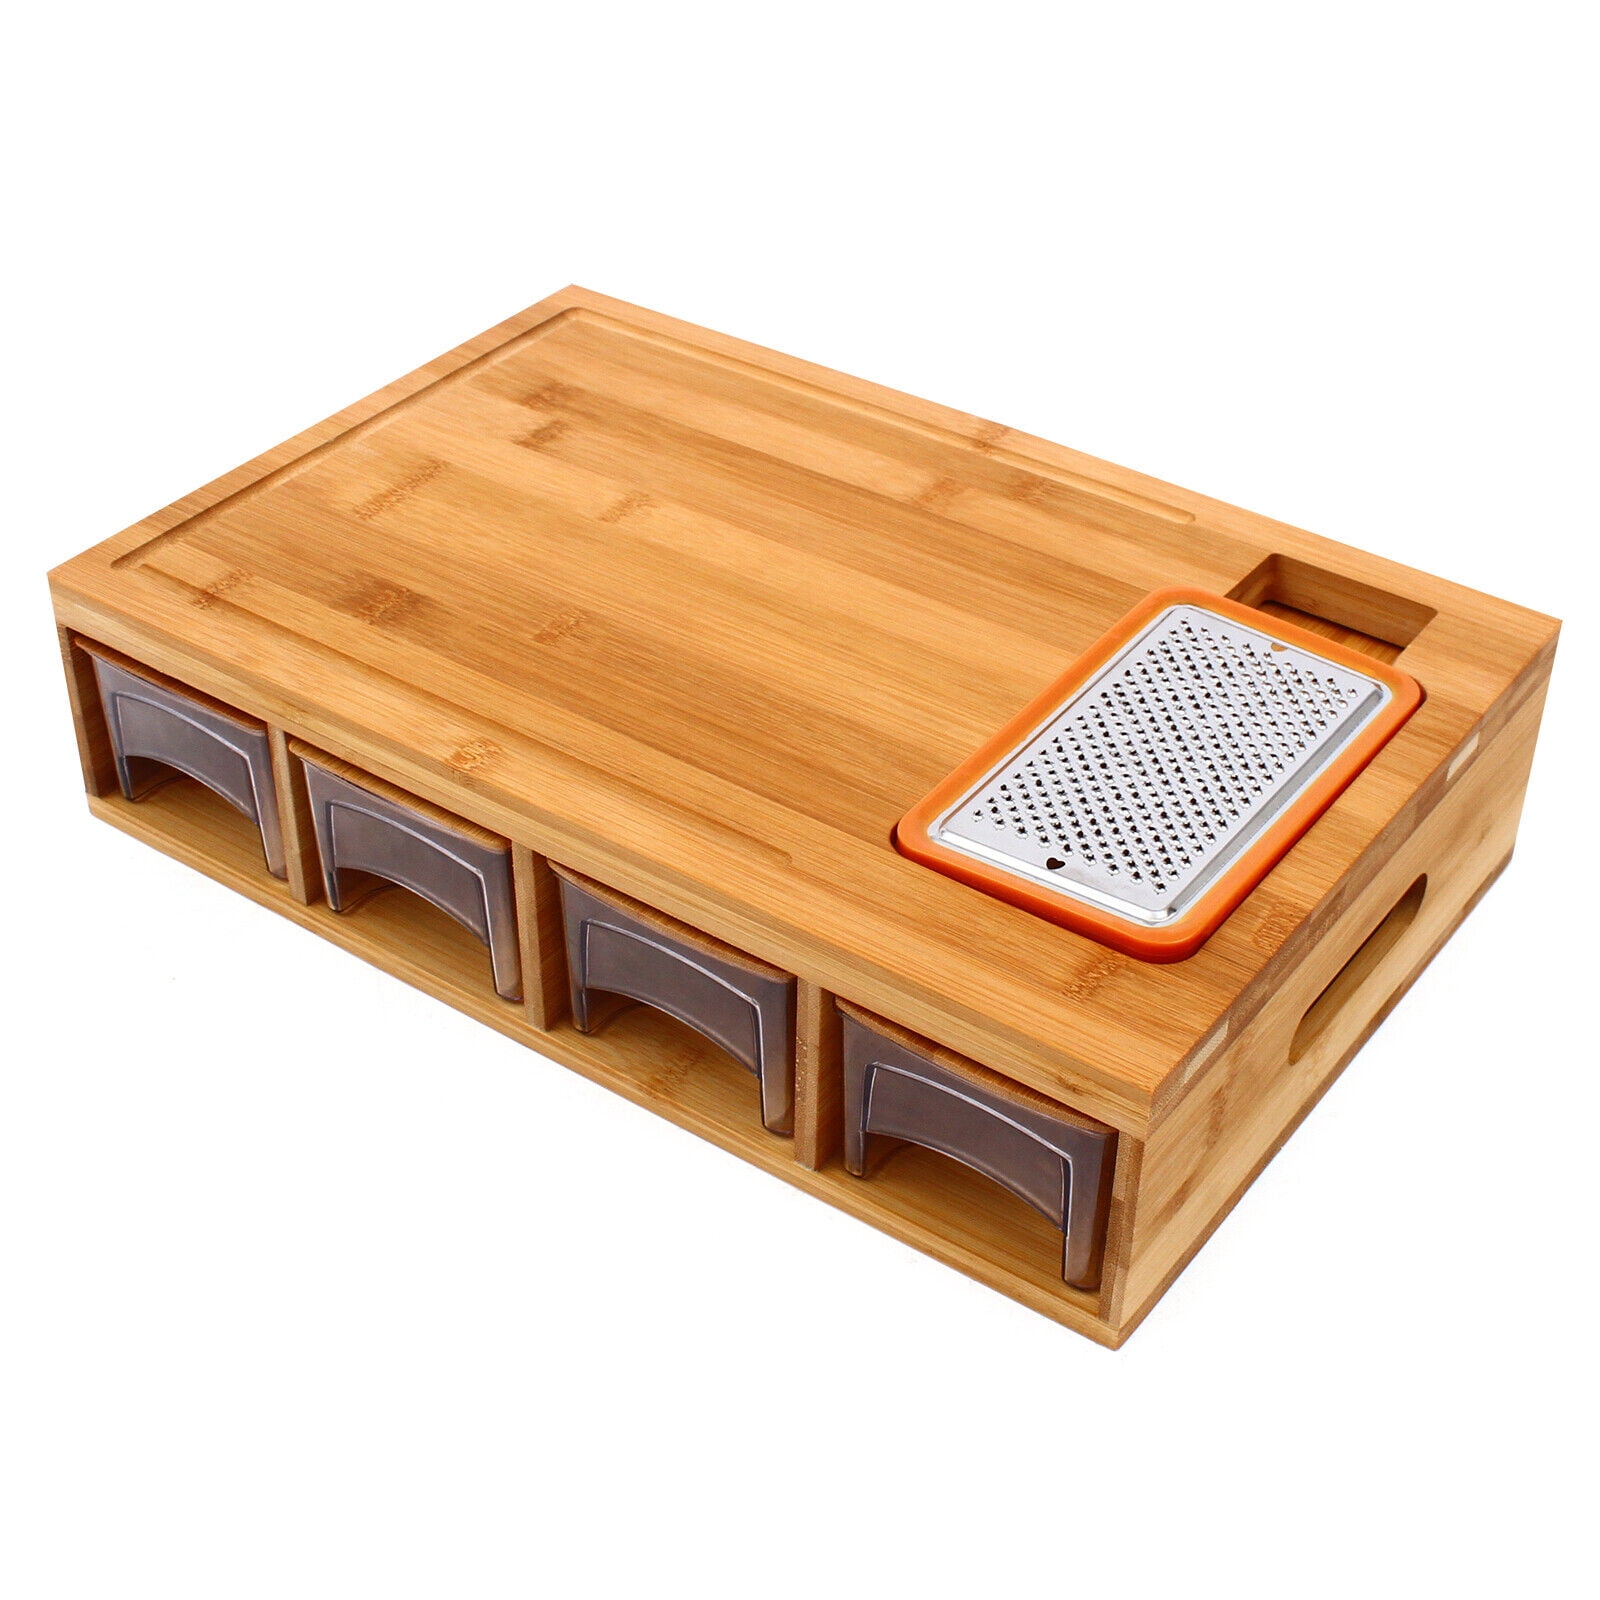 Buy Wholesale China Multi-functional Kitchen Bamboo Chopping Block Cutting  Board With 4 Draw Tray And 4 Vegetable Grater & Cutting Board at USD 12.5